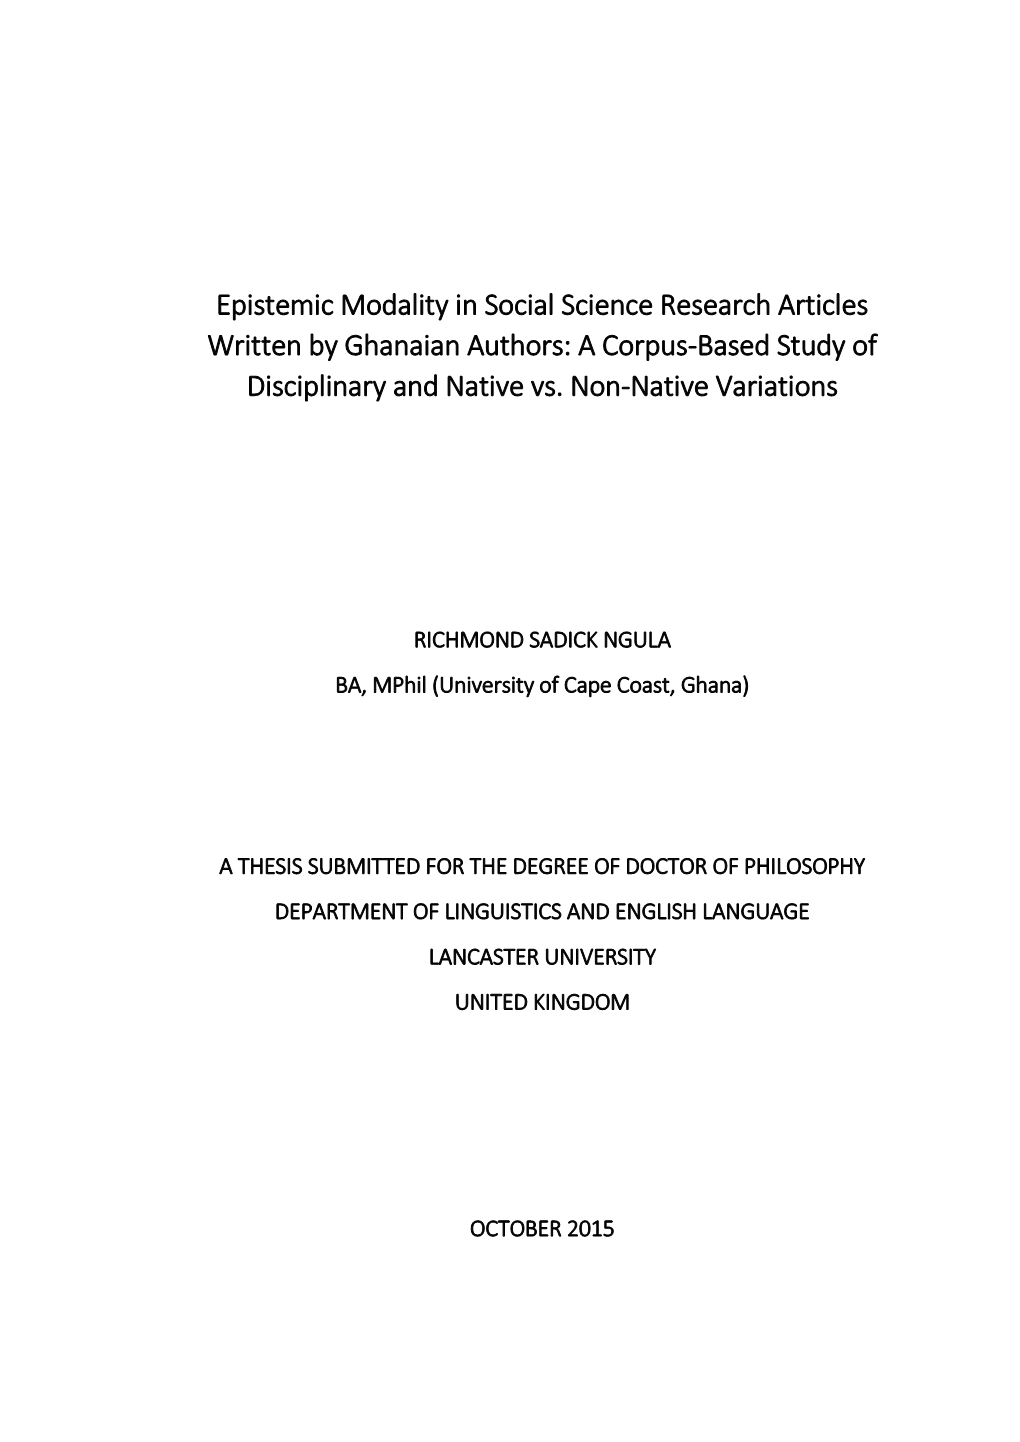 Epistemic Modality in Social Science Research Articles Written by Ghanaian Authors: a Corpus-Based Study of Disciplinary and Native Vs